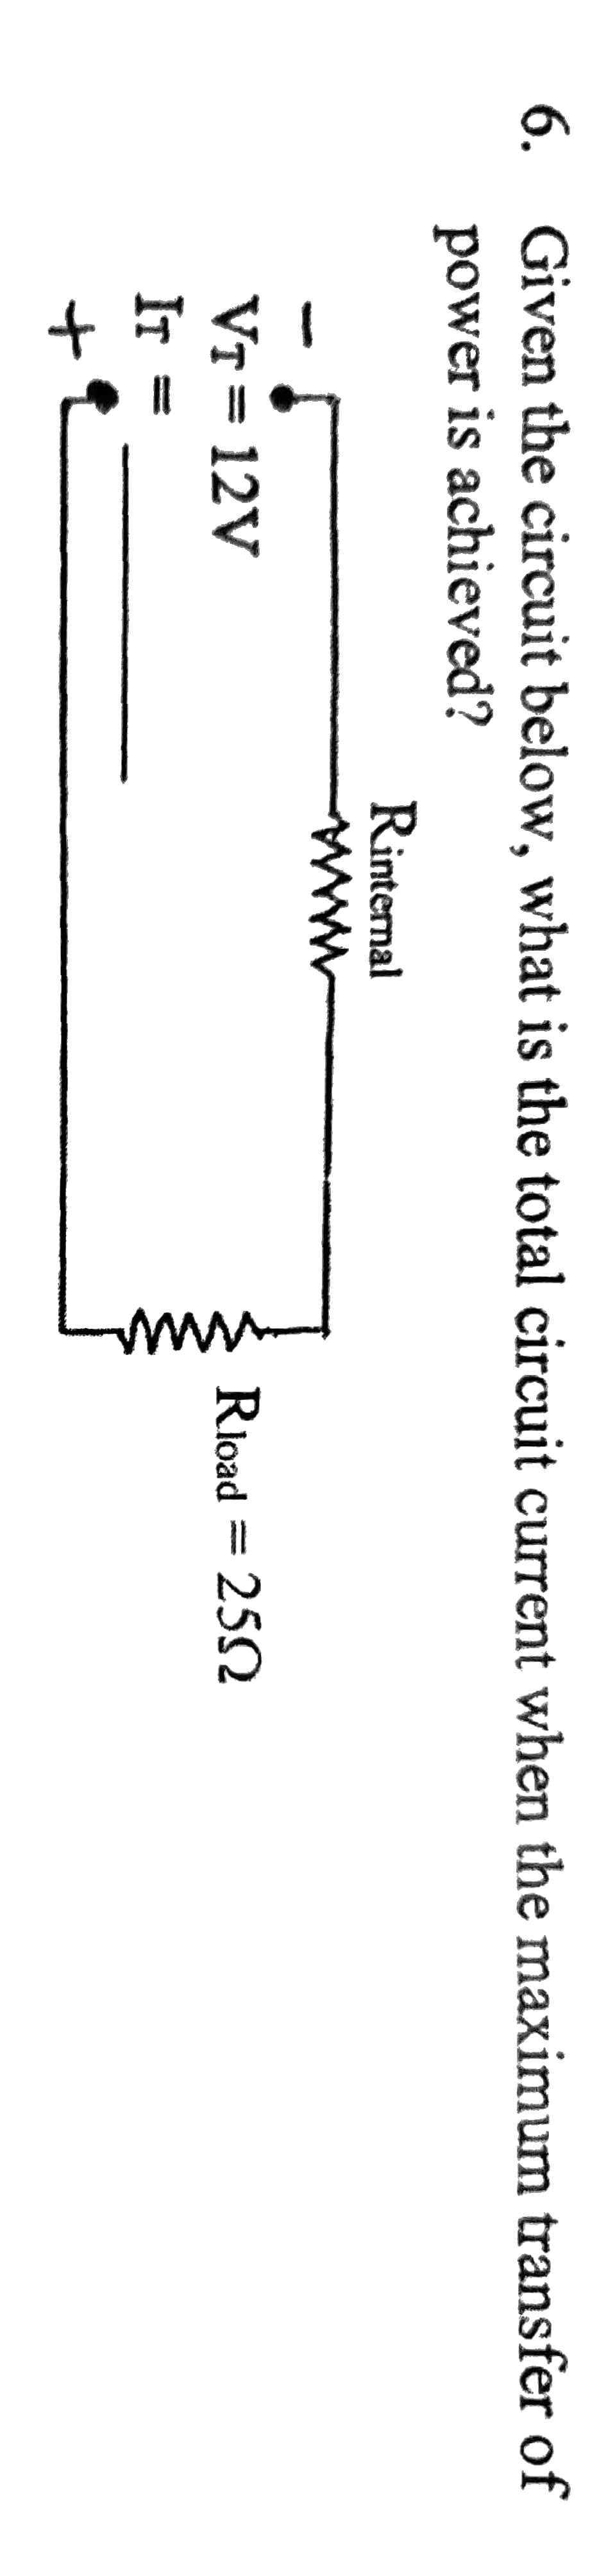 www
6. Given the circuit below, what is the total circuit current when the maximum transfer of
power is achieved?
Rintemal
www.
Vr = 12V
IT
Rload = 25
